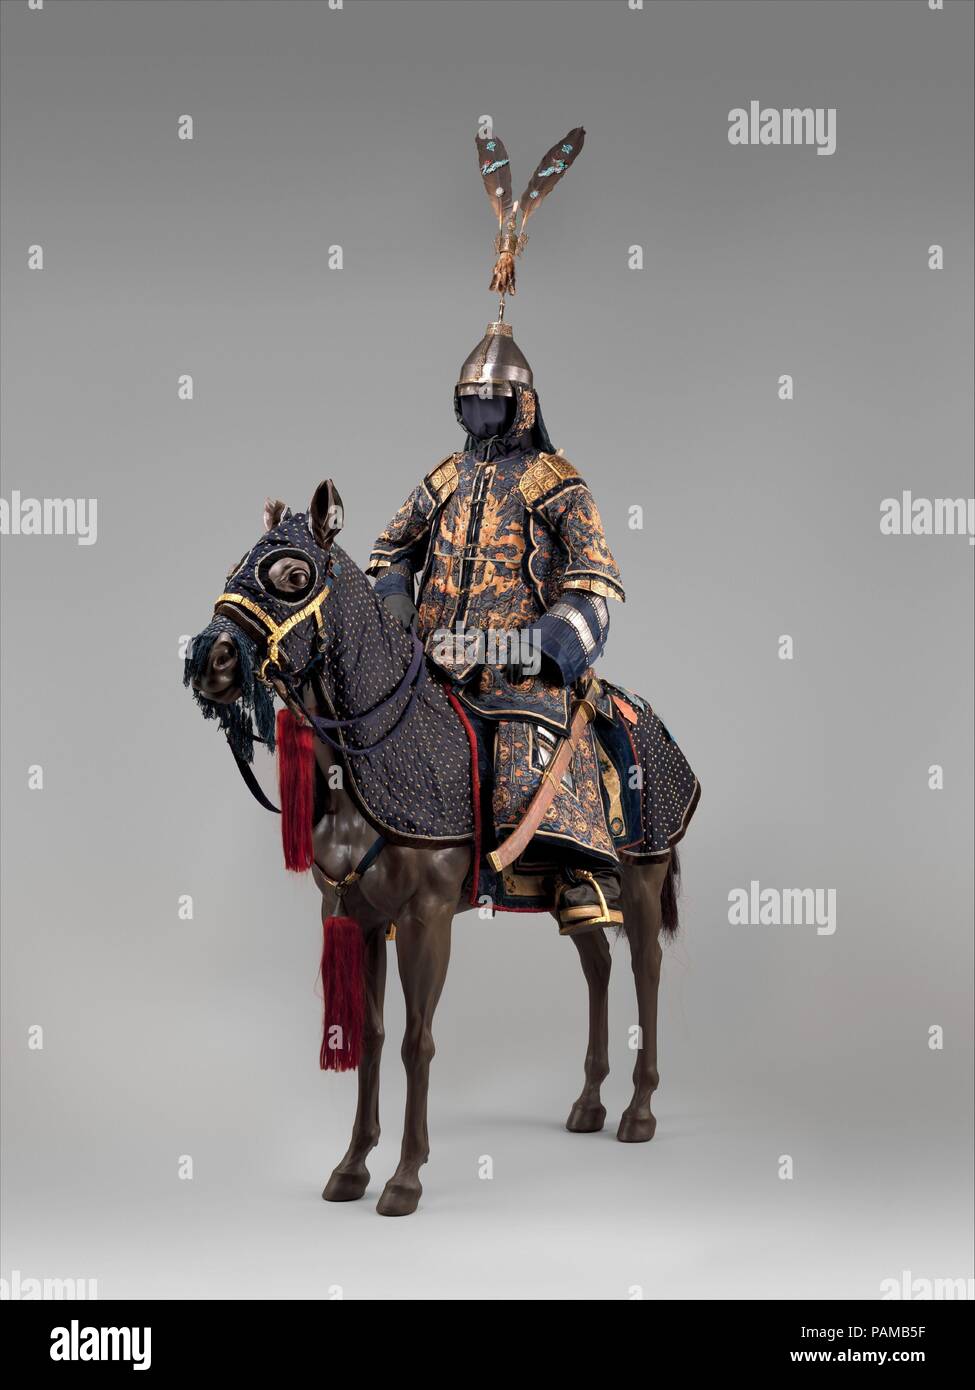 Ceremonial Armors for Man (Dingjia) and Horse. Culture: Chinese. Date: 18th century.  The man's armor, known as dingjia (armor with nails), is a very elaborate example of the military costume worn at the imperial court by high-ranking officials in the eighteenth and nineteenth centuries. It consists of a jacket with sleeves and an ankle-length skirt constructed of narrow overlapping plates riveted inside the fabric layers with the securing rivet heads visible on the outside. Some of these plates, of brightly polished steel, are exposed on the arms and skirt. Although not intended for use in ba Stock Photo